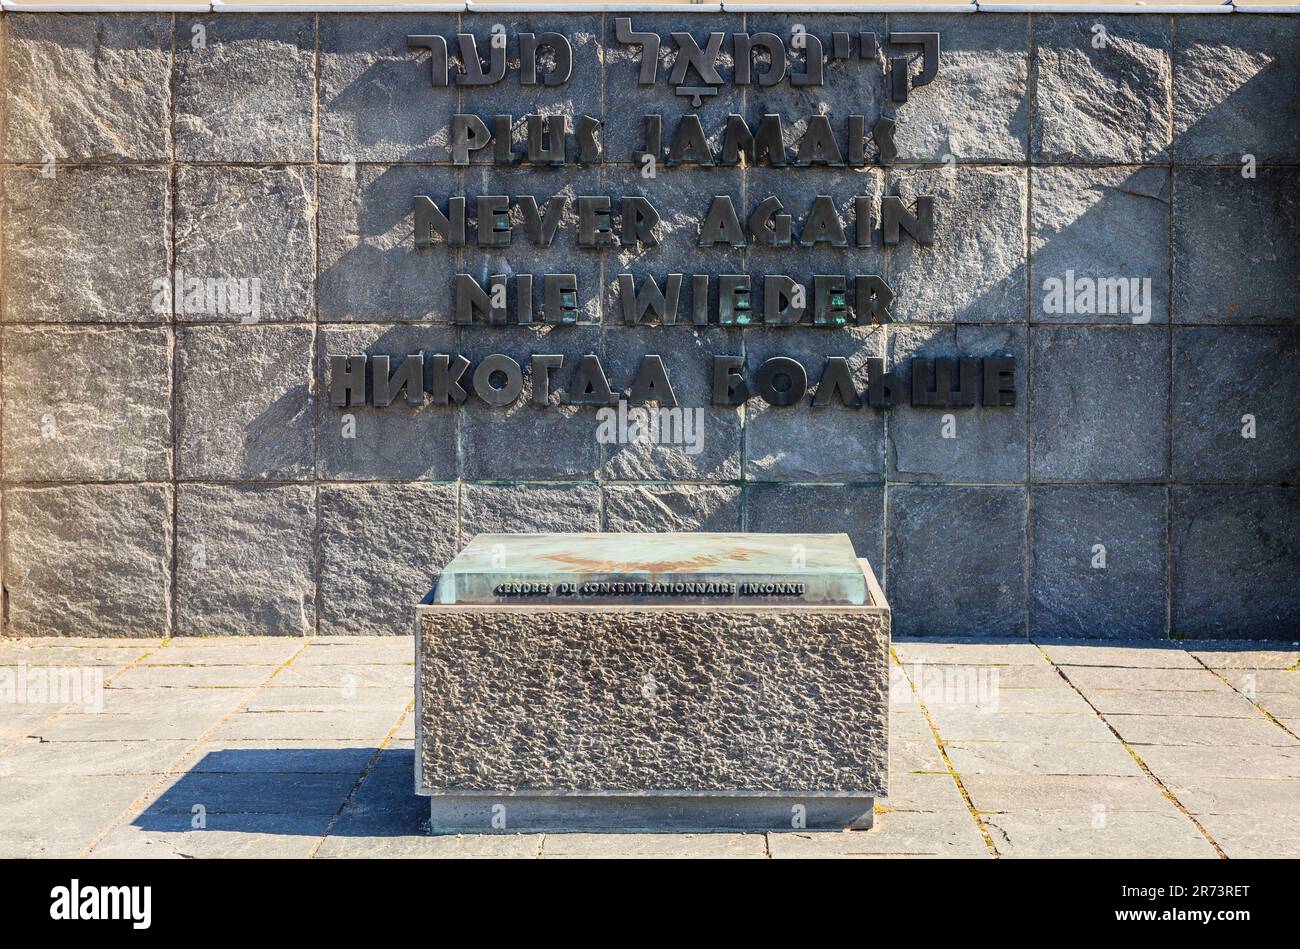 Dachau, Germany, September 30, 2015: International Memoriall wall at the Dachau Concentration Camp memorial site Stock Photo